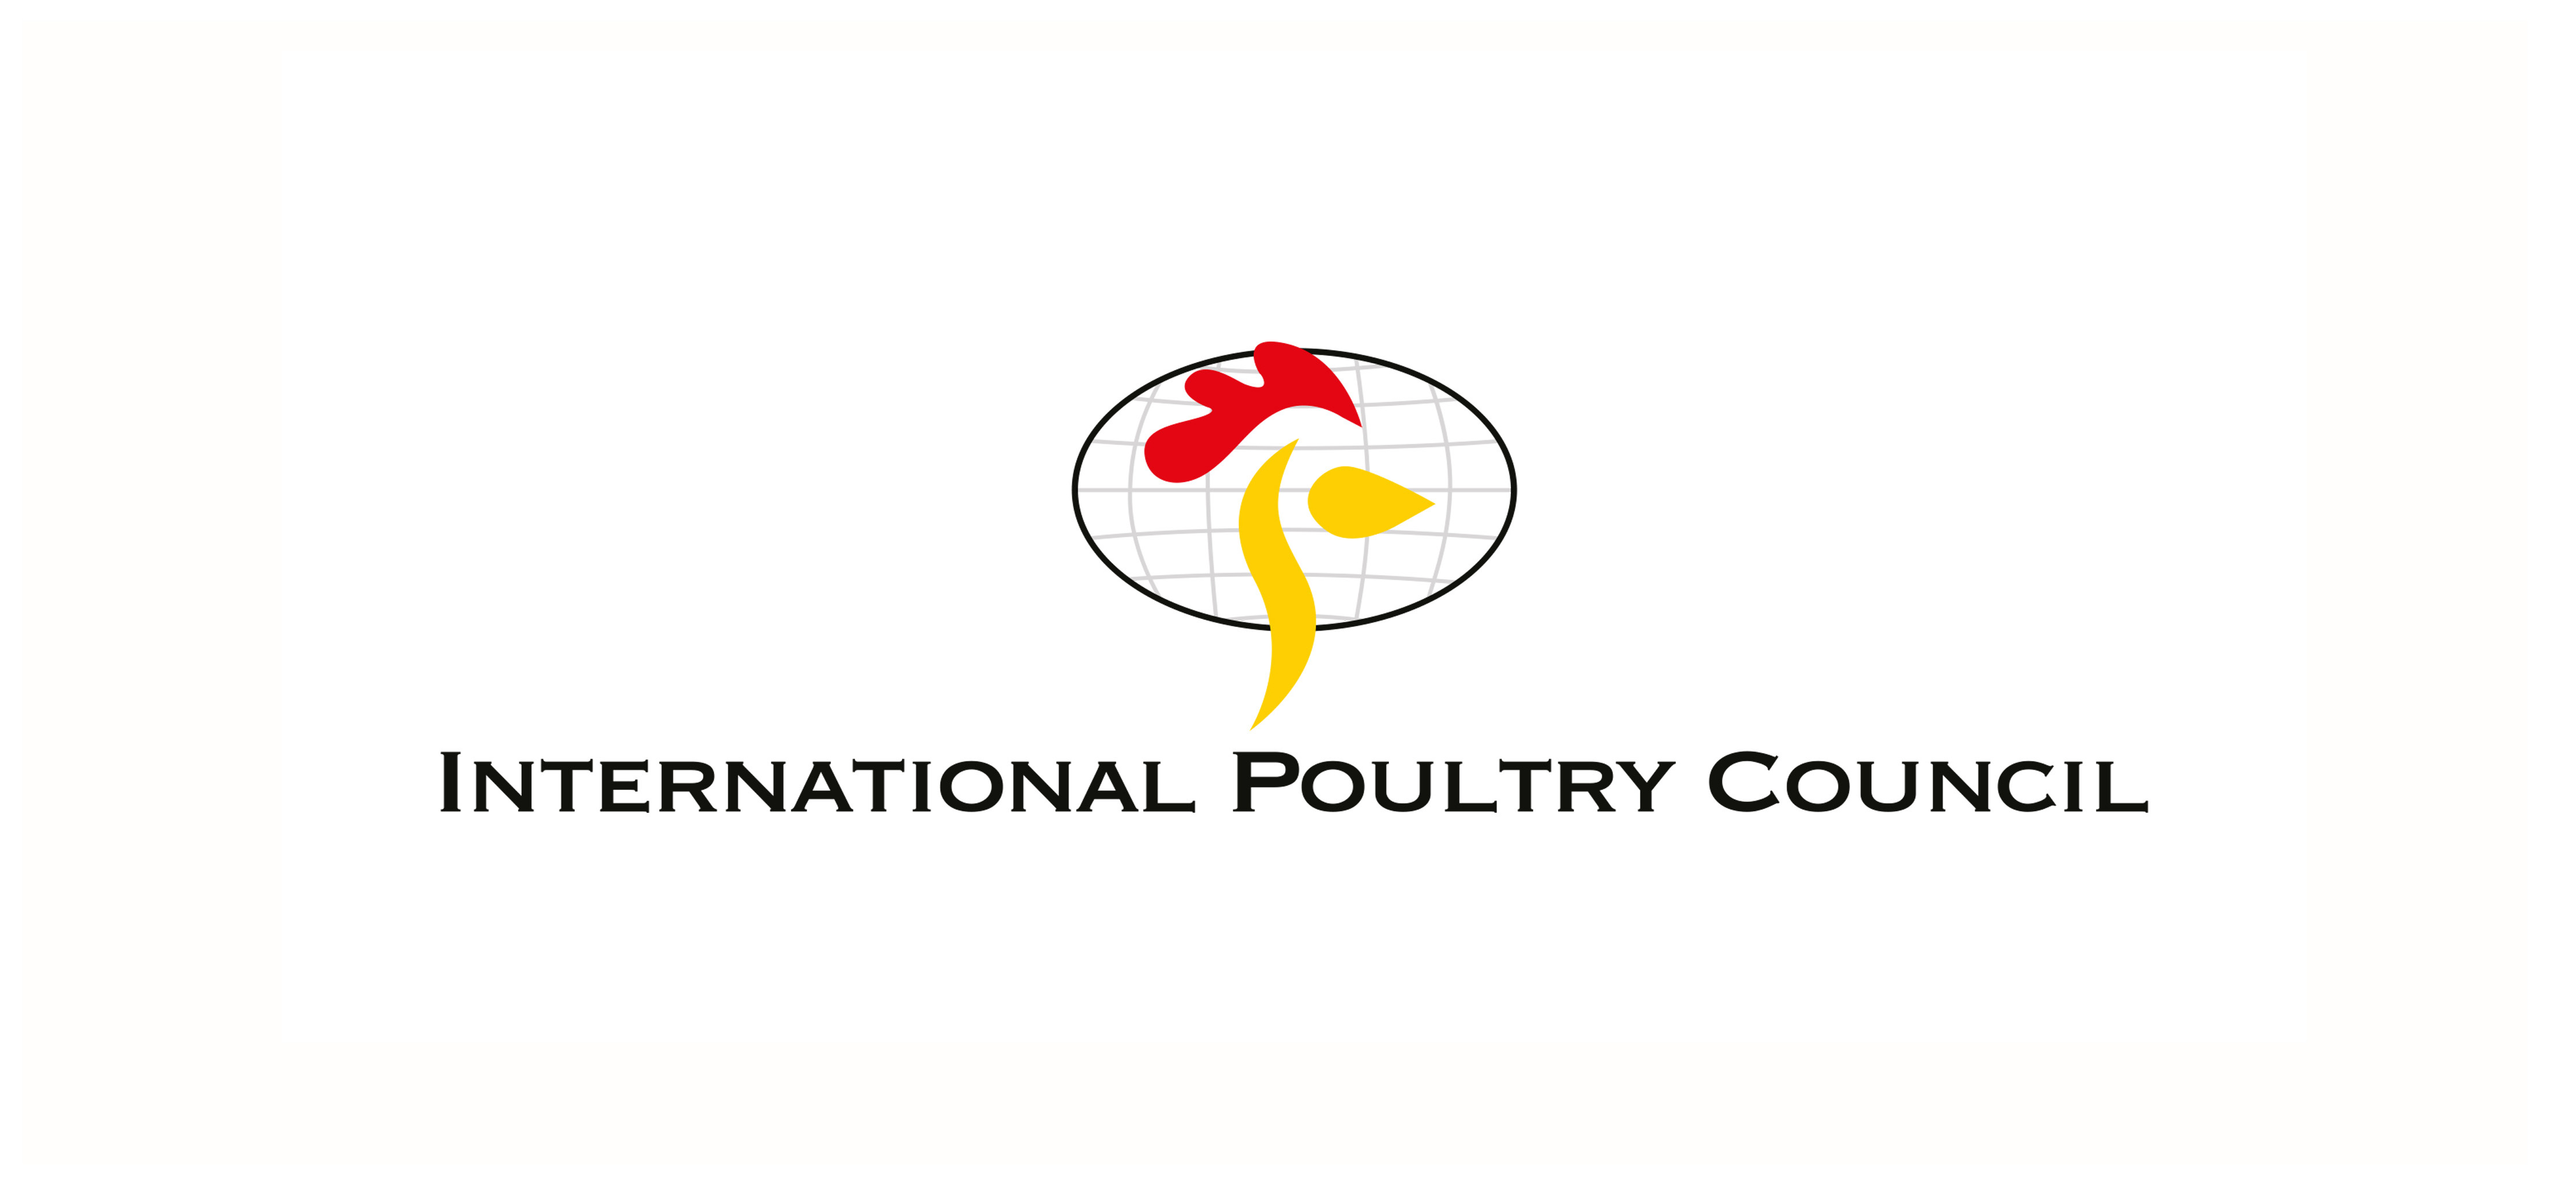 International Poultry Council Celebrates its 15th Anniversary